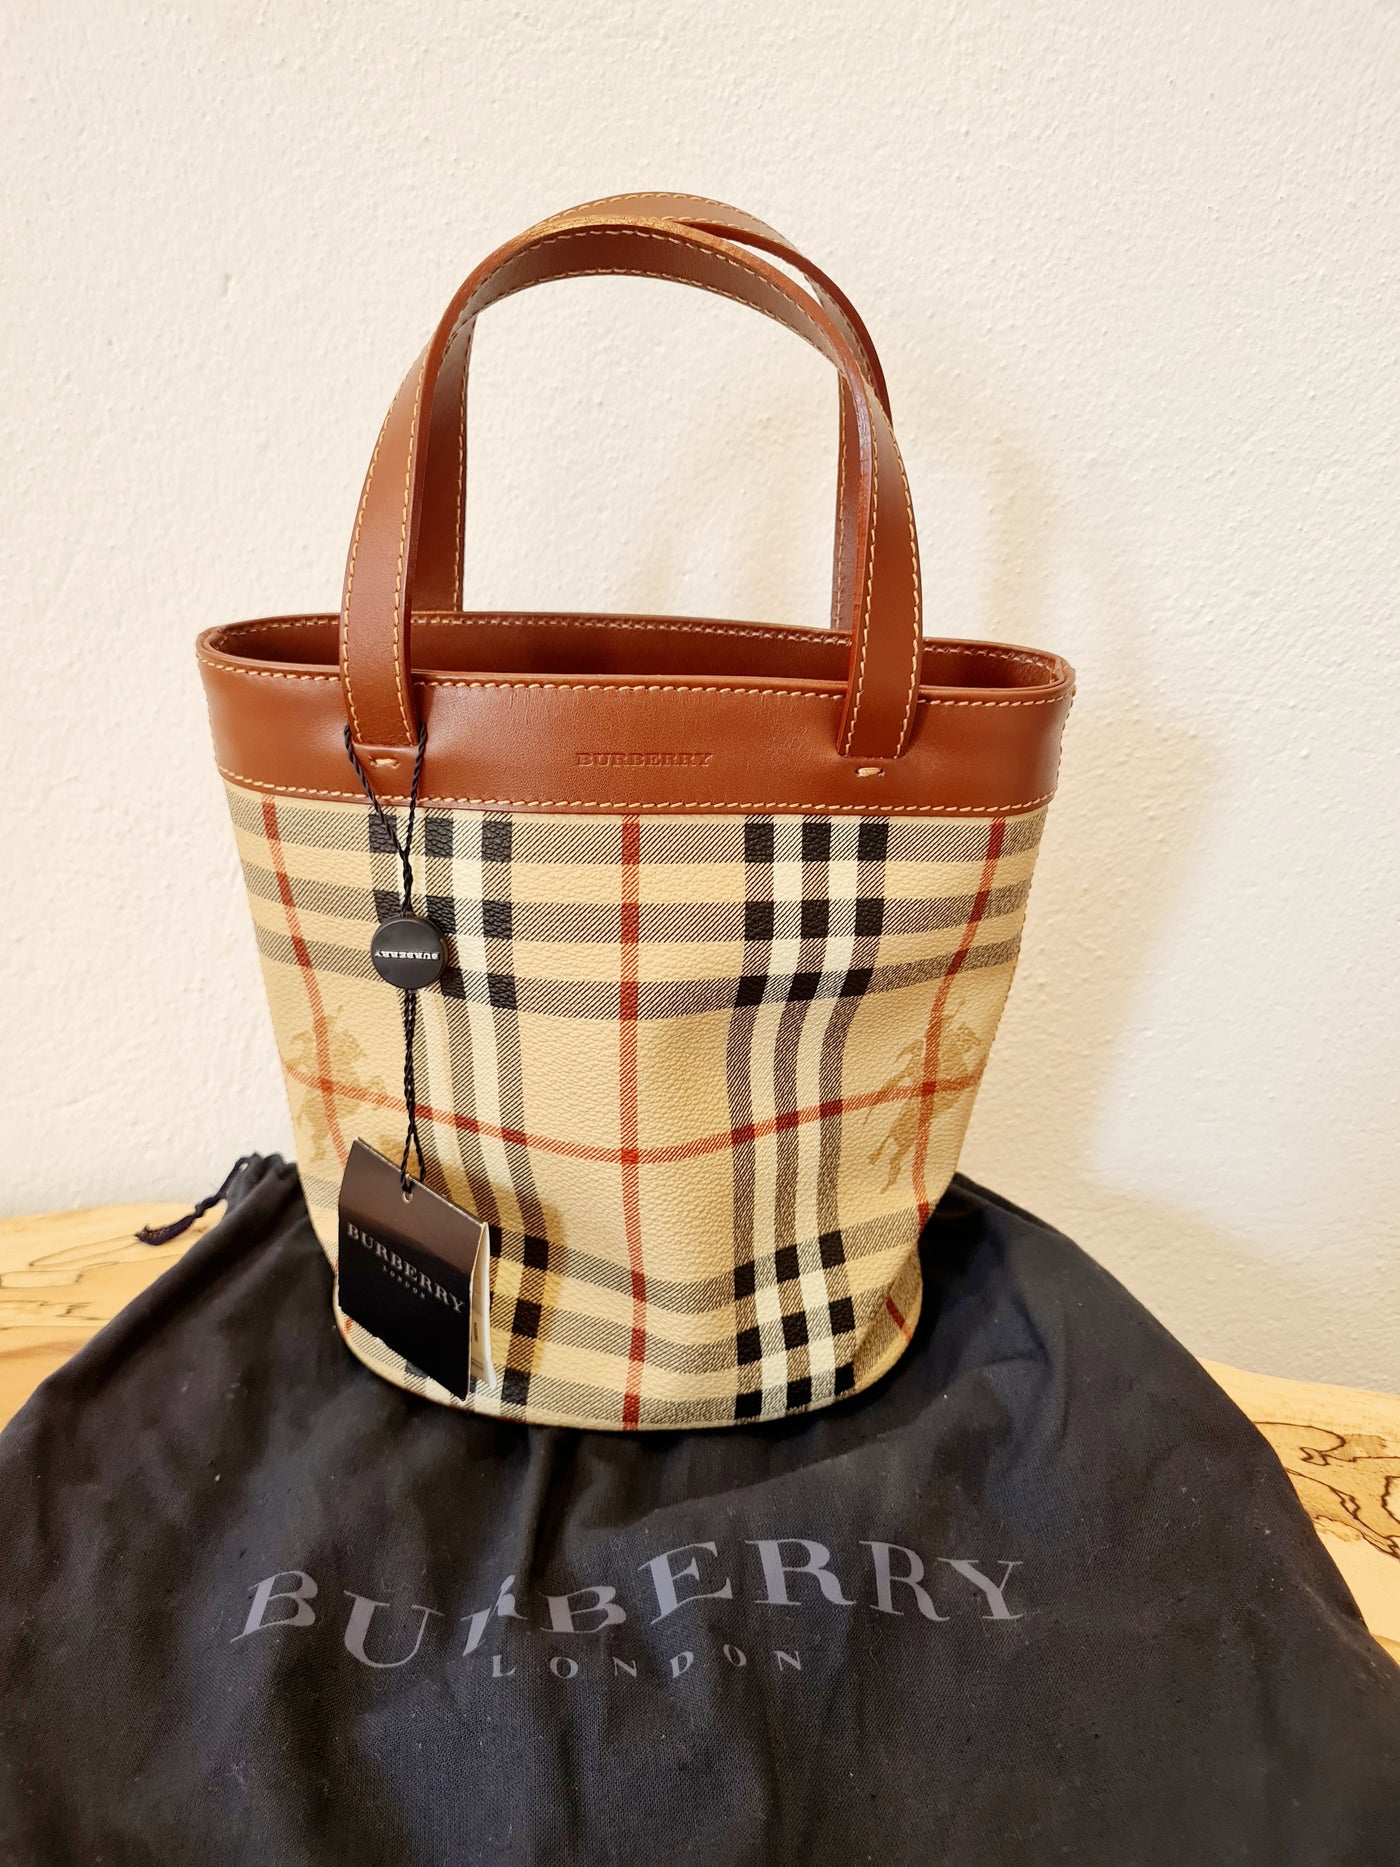 Burberry Vintage Haymarket small tote New with tags